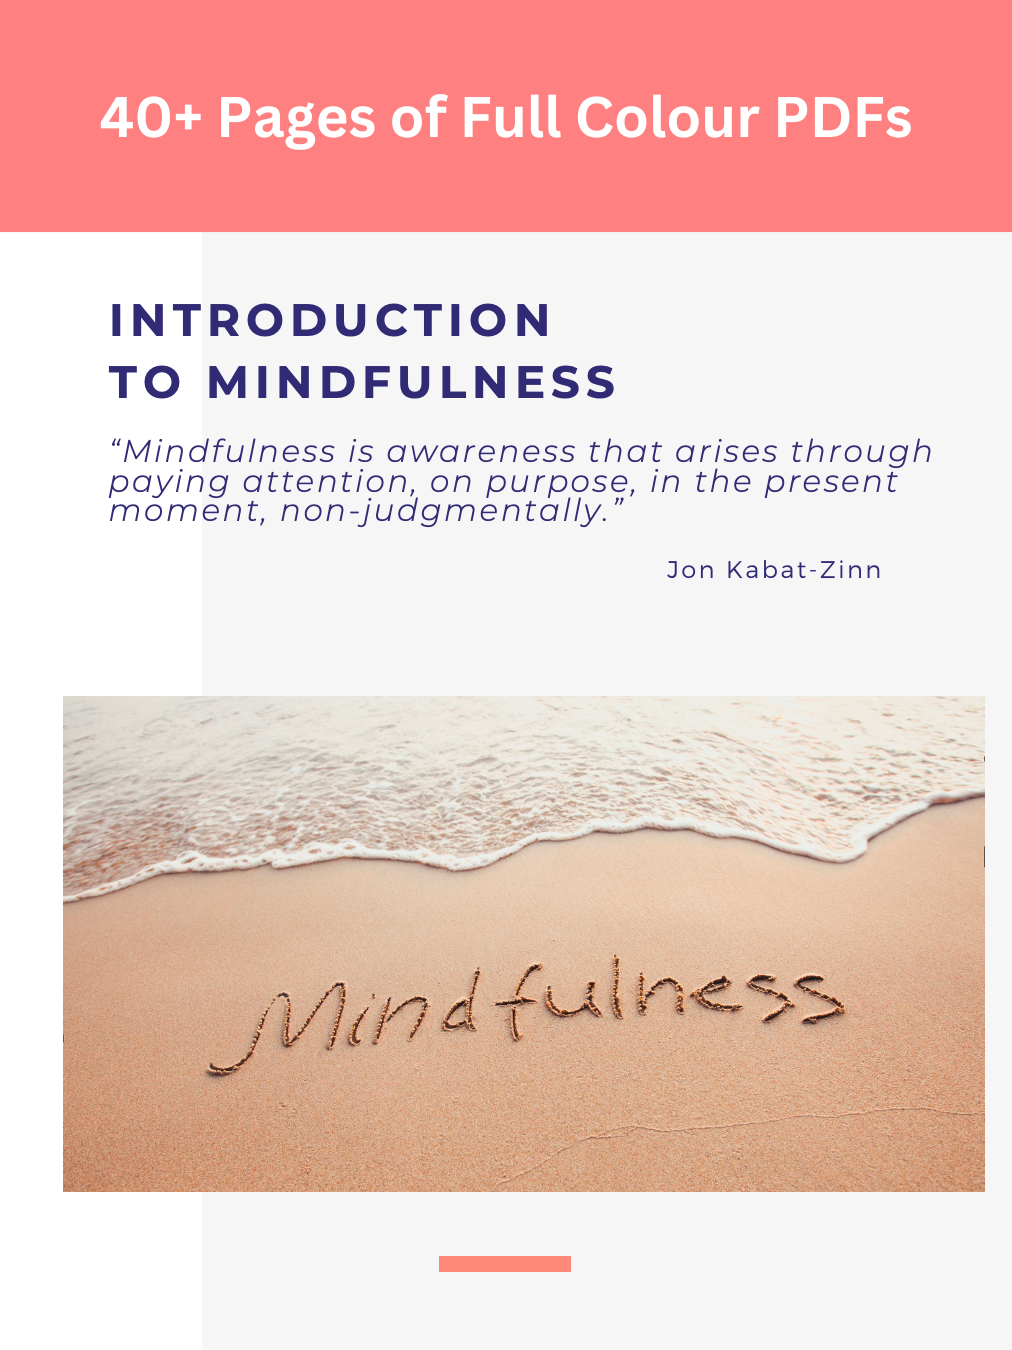 Introduction to Mindfulness PDF Article